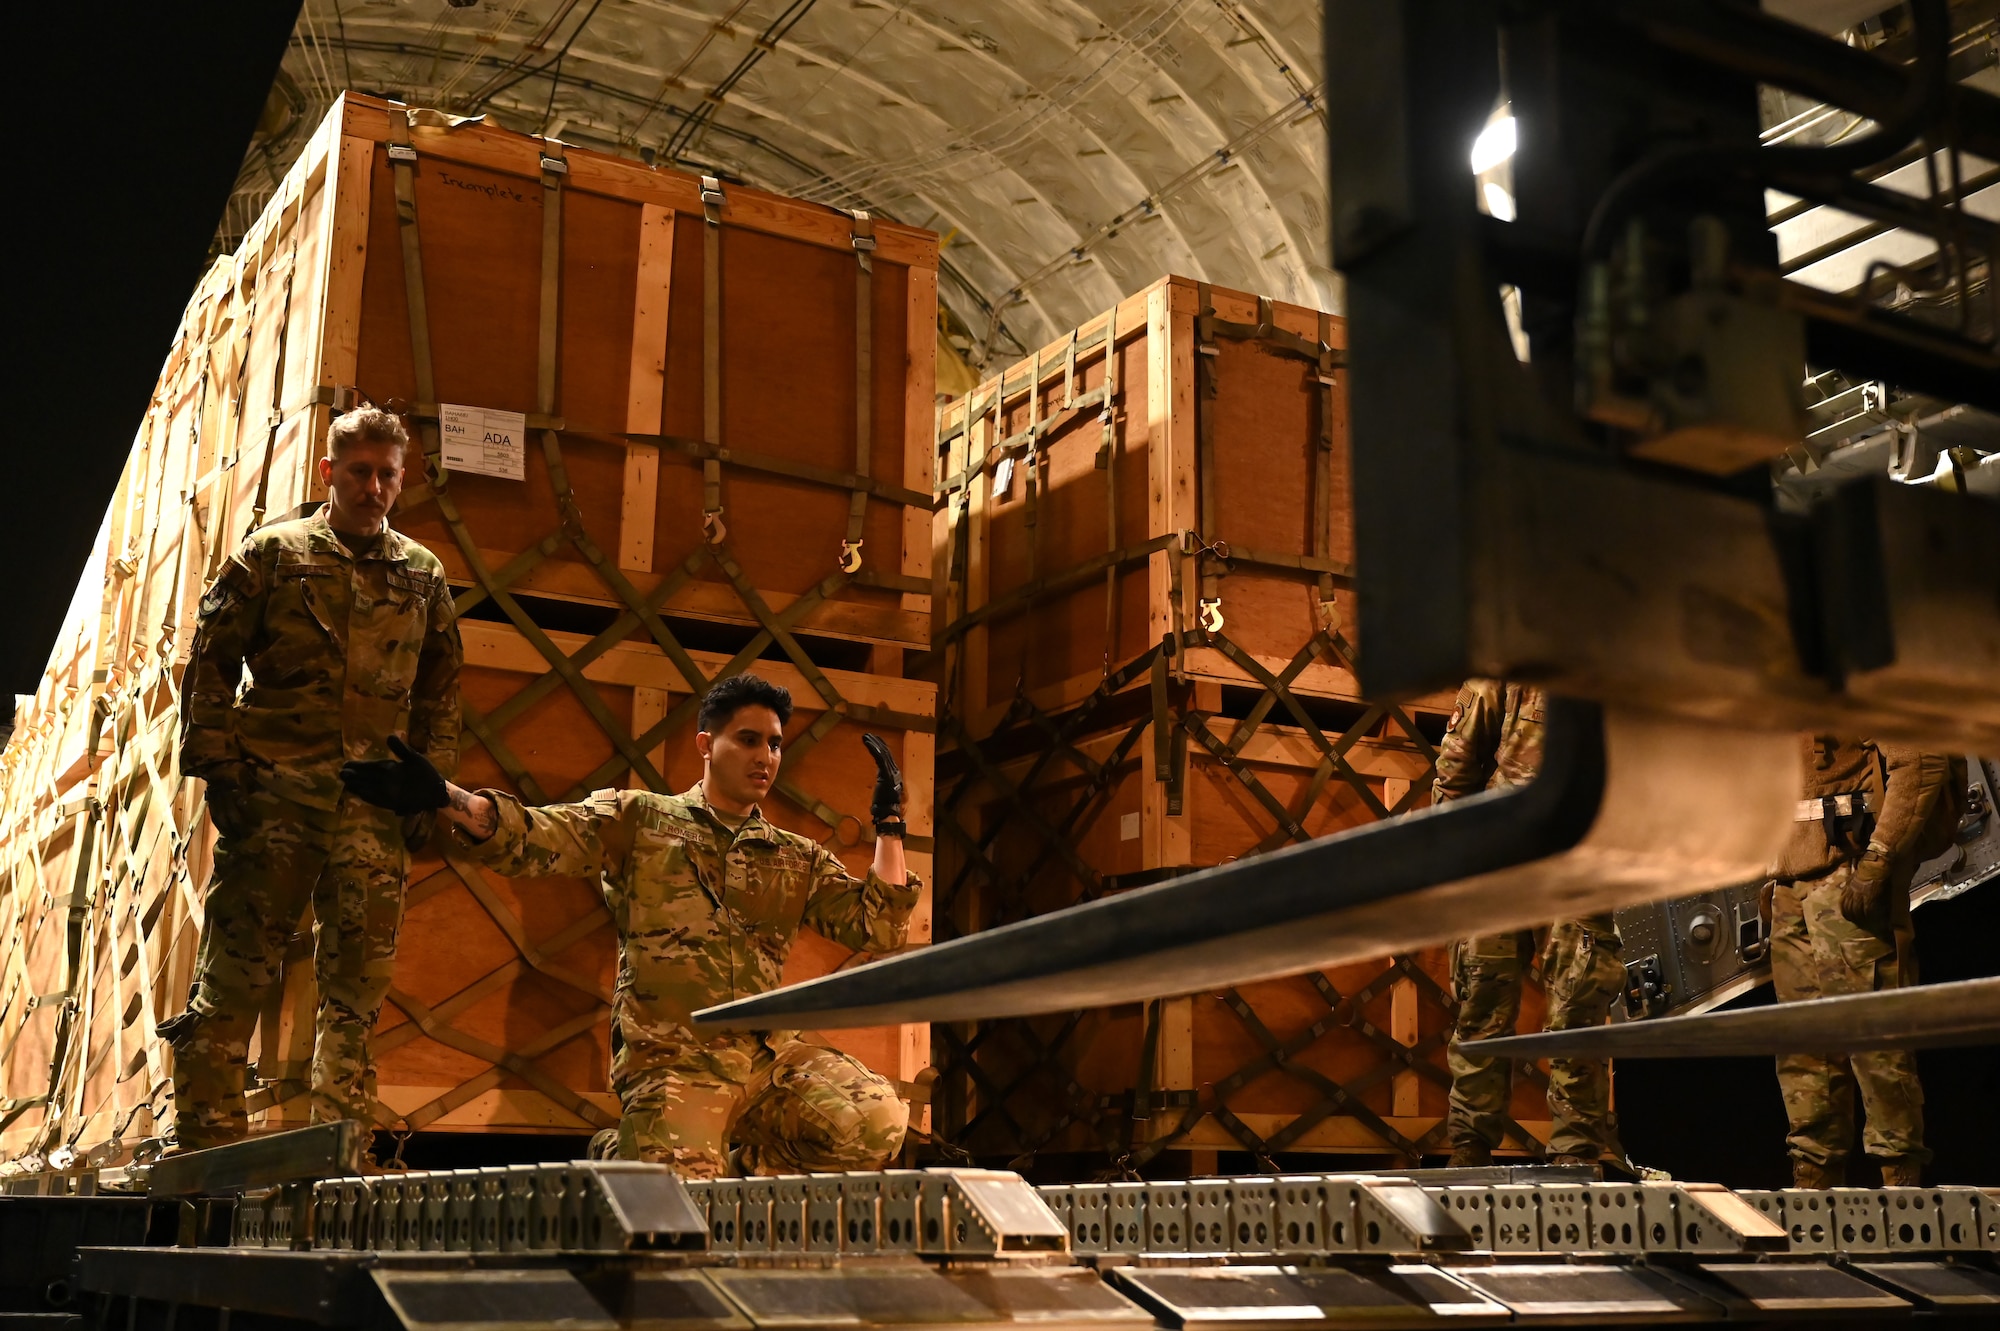 U.S. Air Force Airmen unload humanitarian aid supplies from a C-17 Globemaster III assigned to the 8th Expeditionary Airlift Squadron, to provide international aid to Türkiye at Incirlik Air Base, Türkiye, Feb. 21, 2023. The 8th EAS personnel airlifted more than 300,000 pounds of aid, providing humanitarian assistance in response to the devastating impacts in Türkiye following the worst earthquake to hit the region in almost a century. (U.S. Air Force photo by Staff Sgt. Gerald R. Willis)